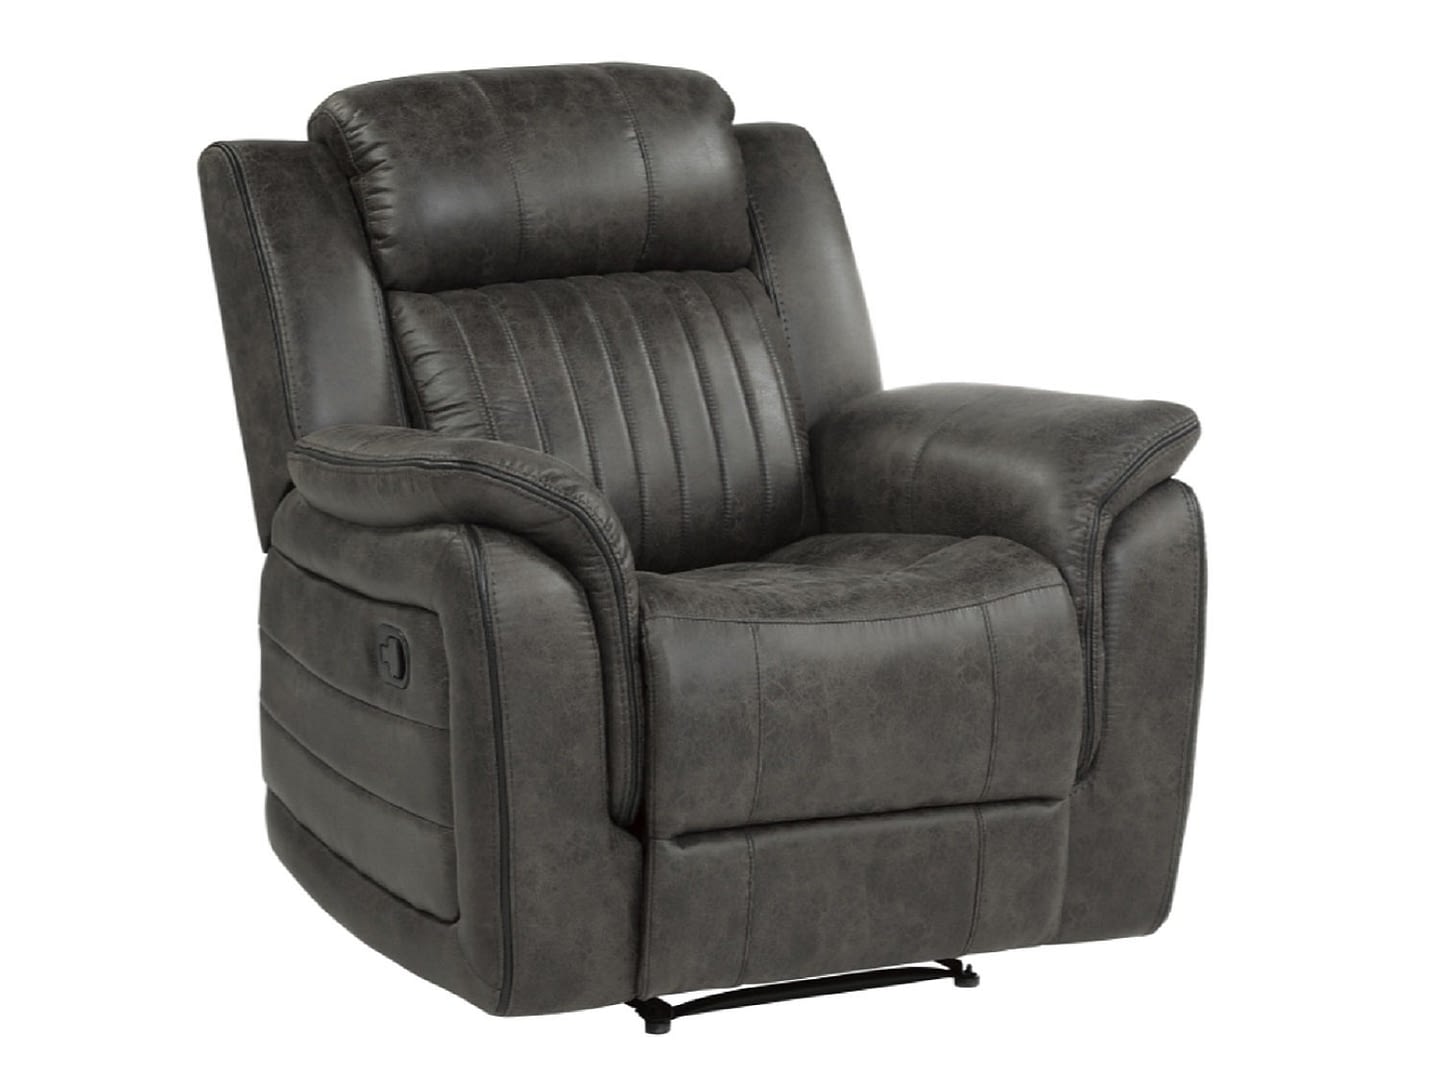 SONORA Recliner Chair - Side